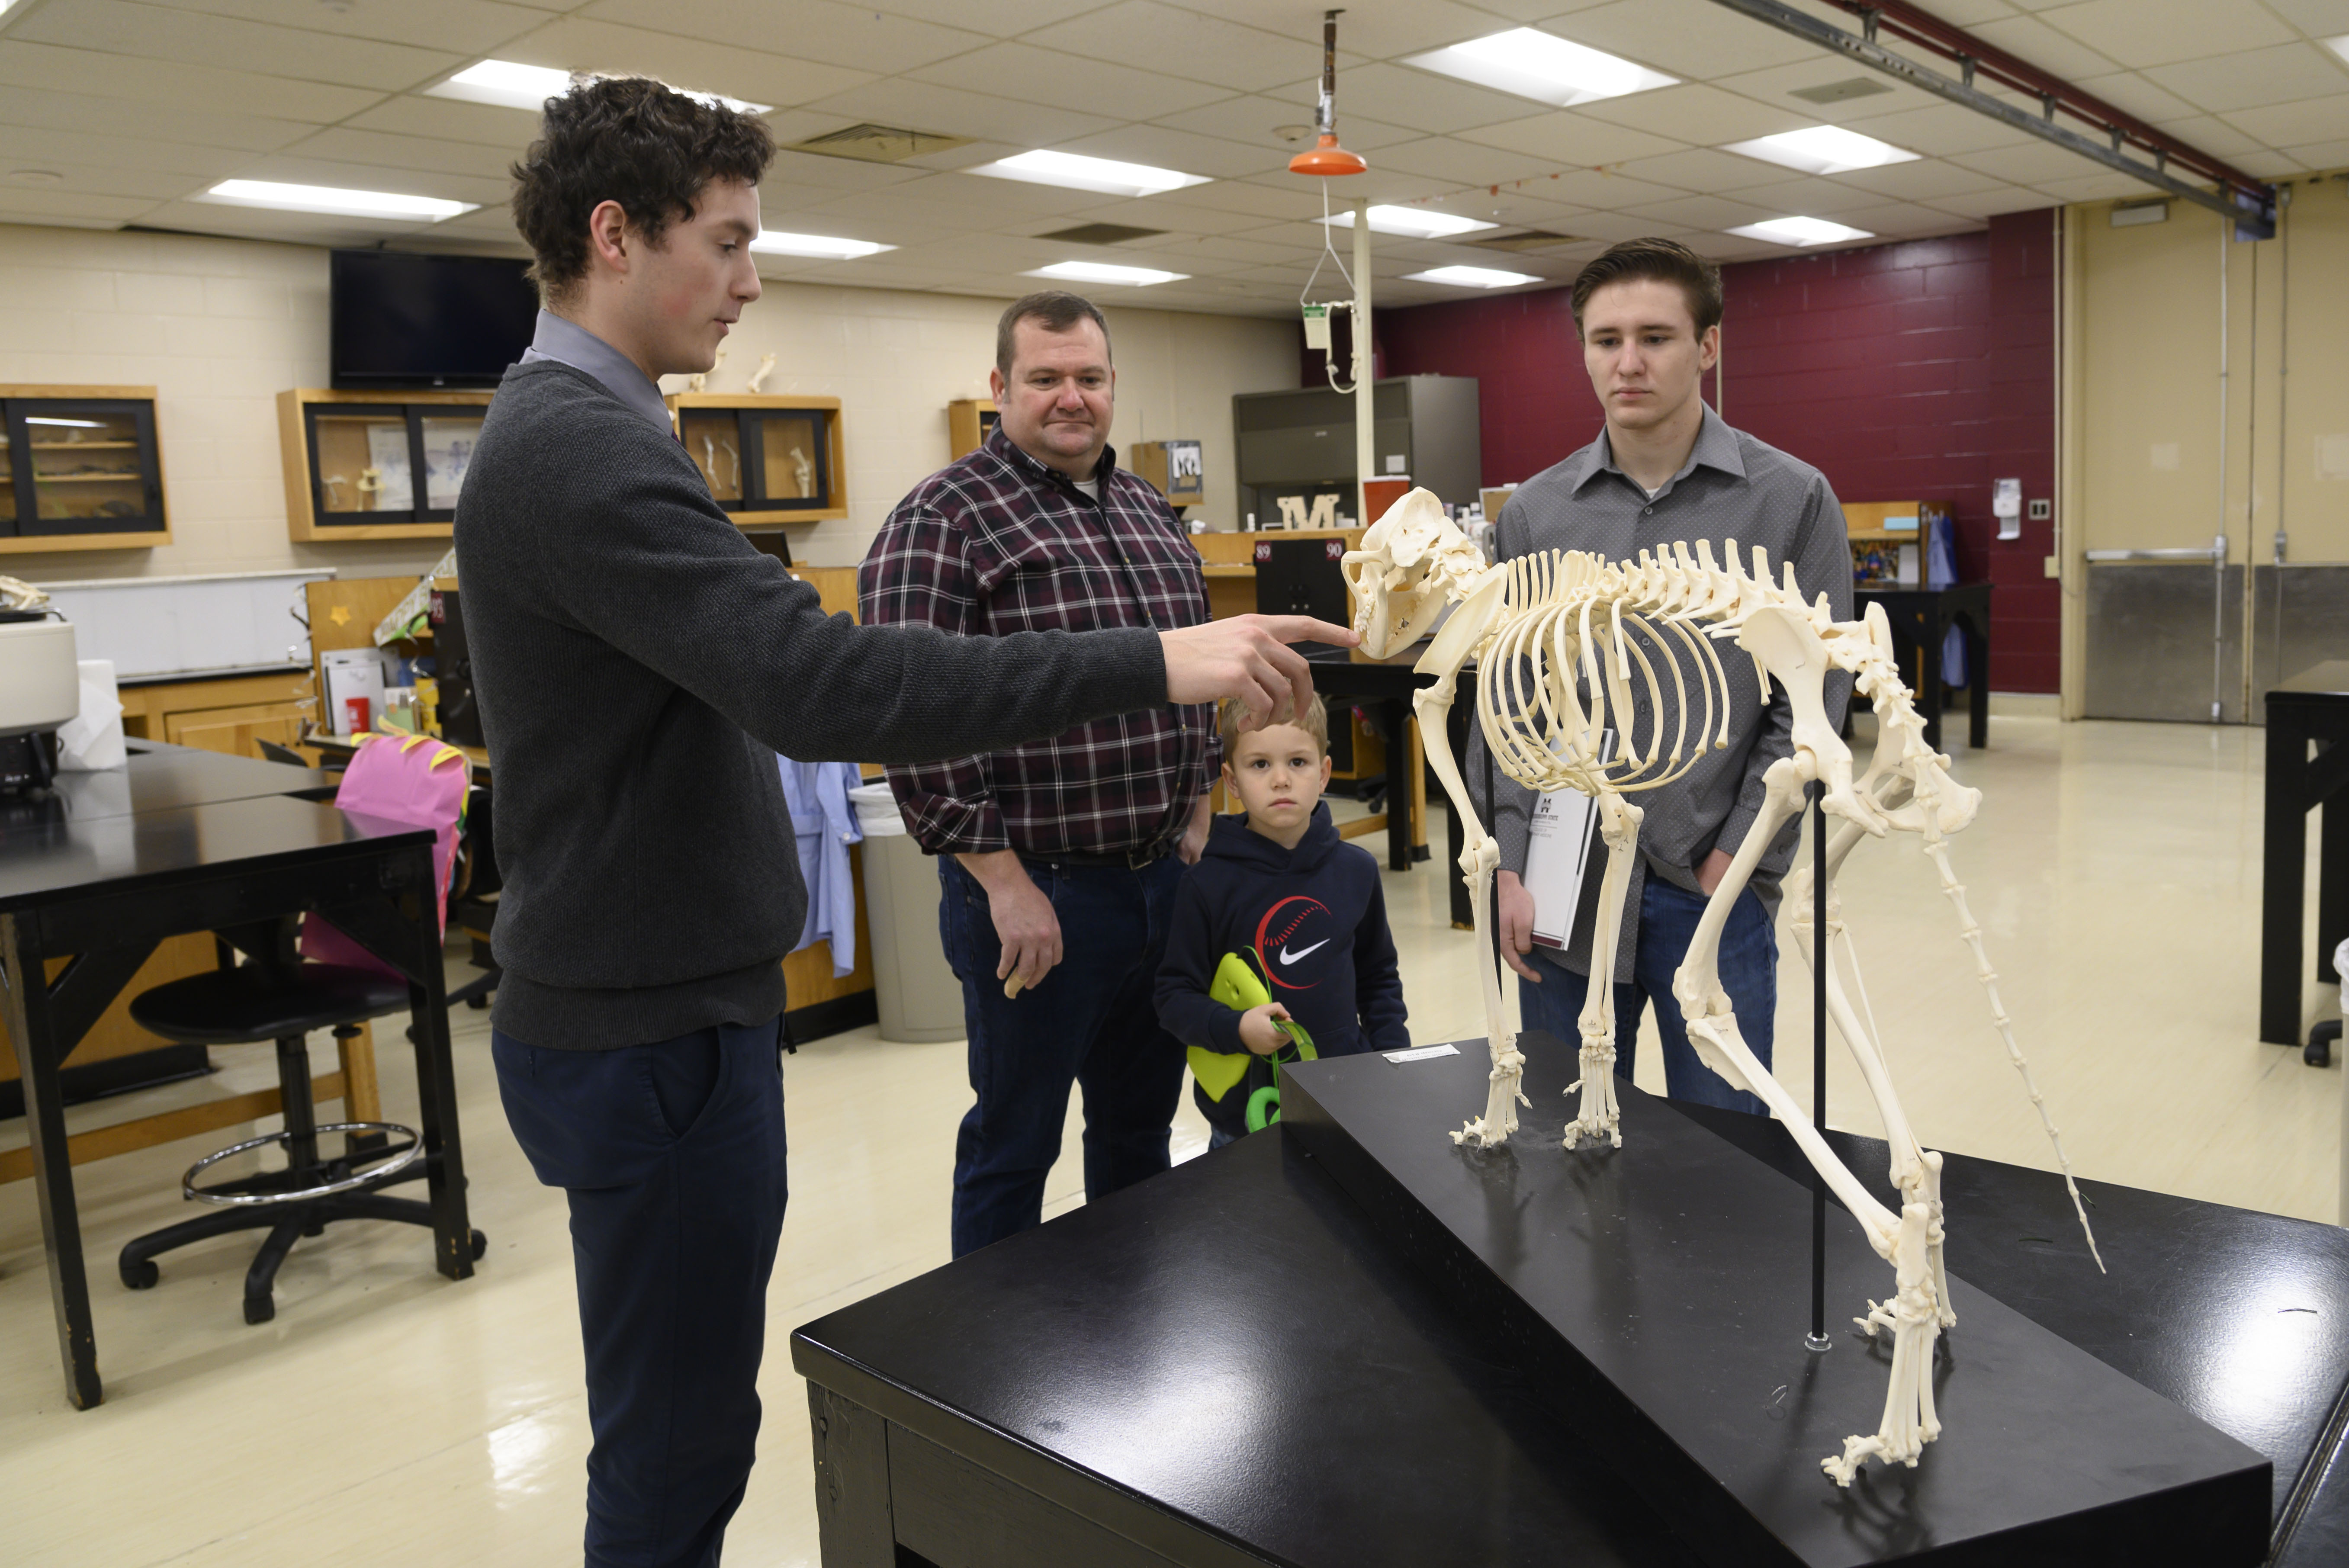 A prospective student and father look at a horse skeleton model